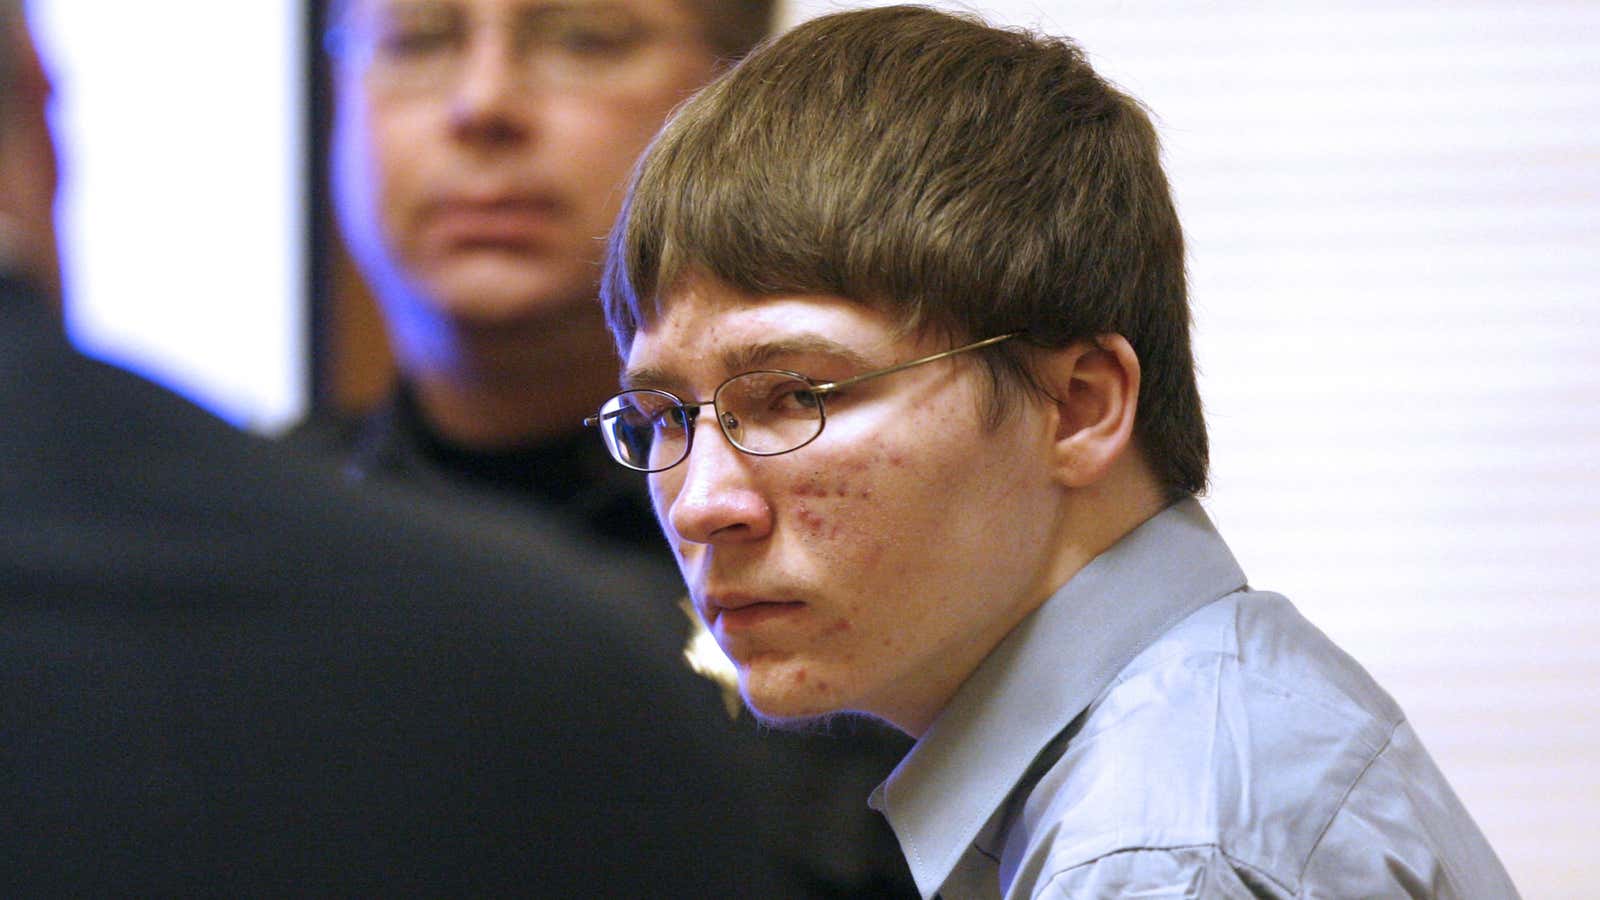 A Netflix documentary may have saved Dassey’s life